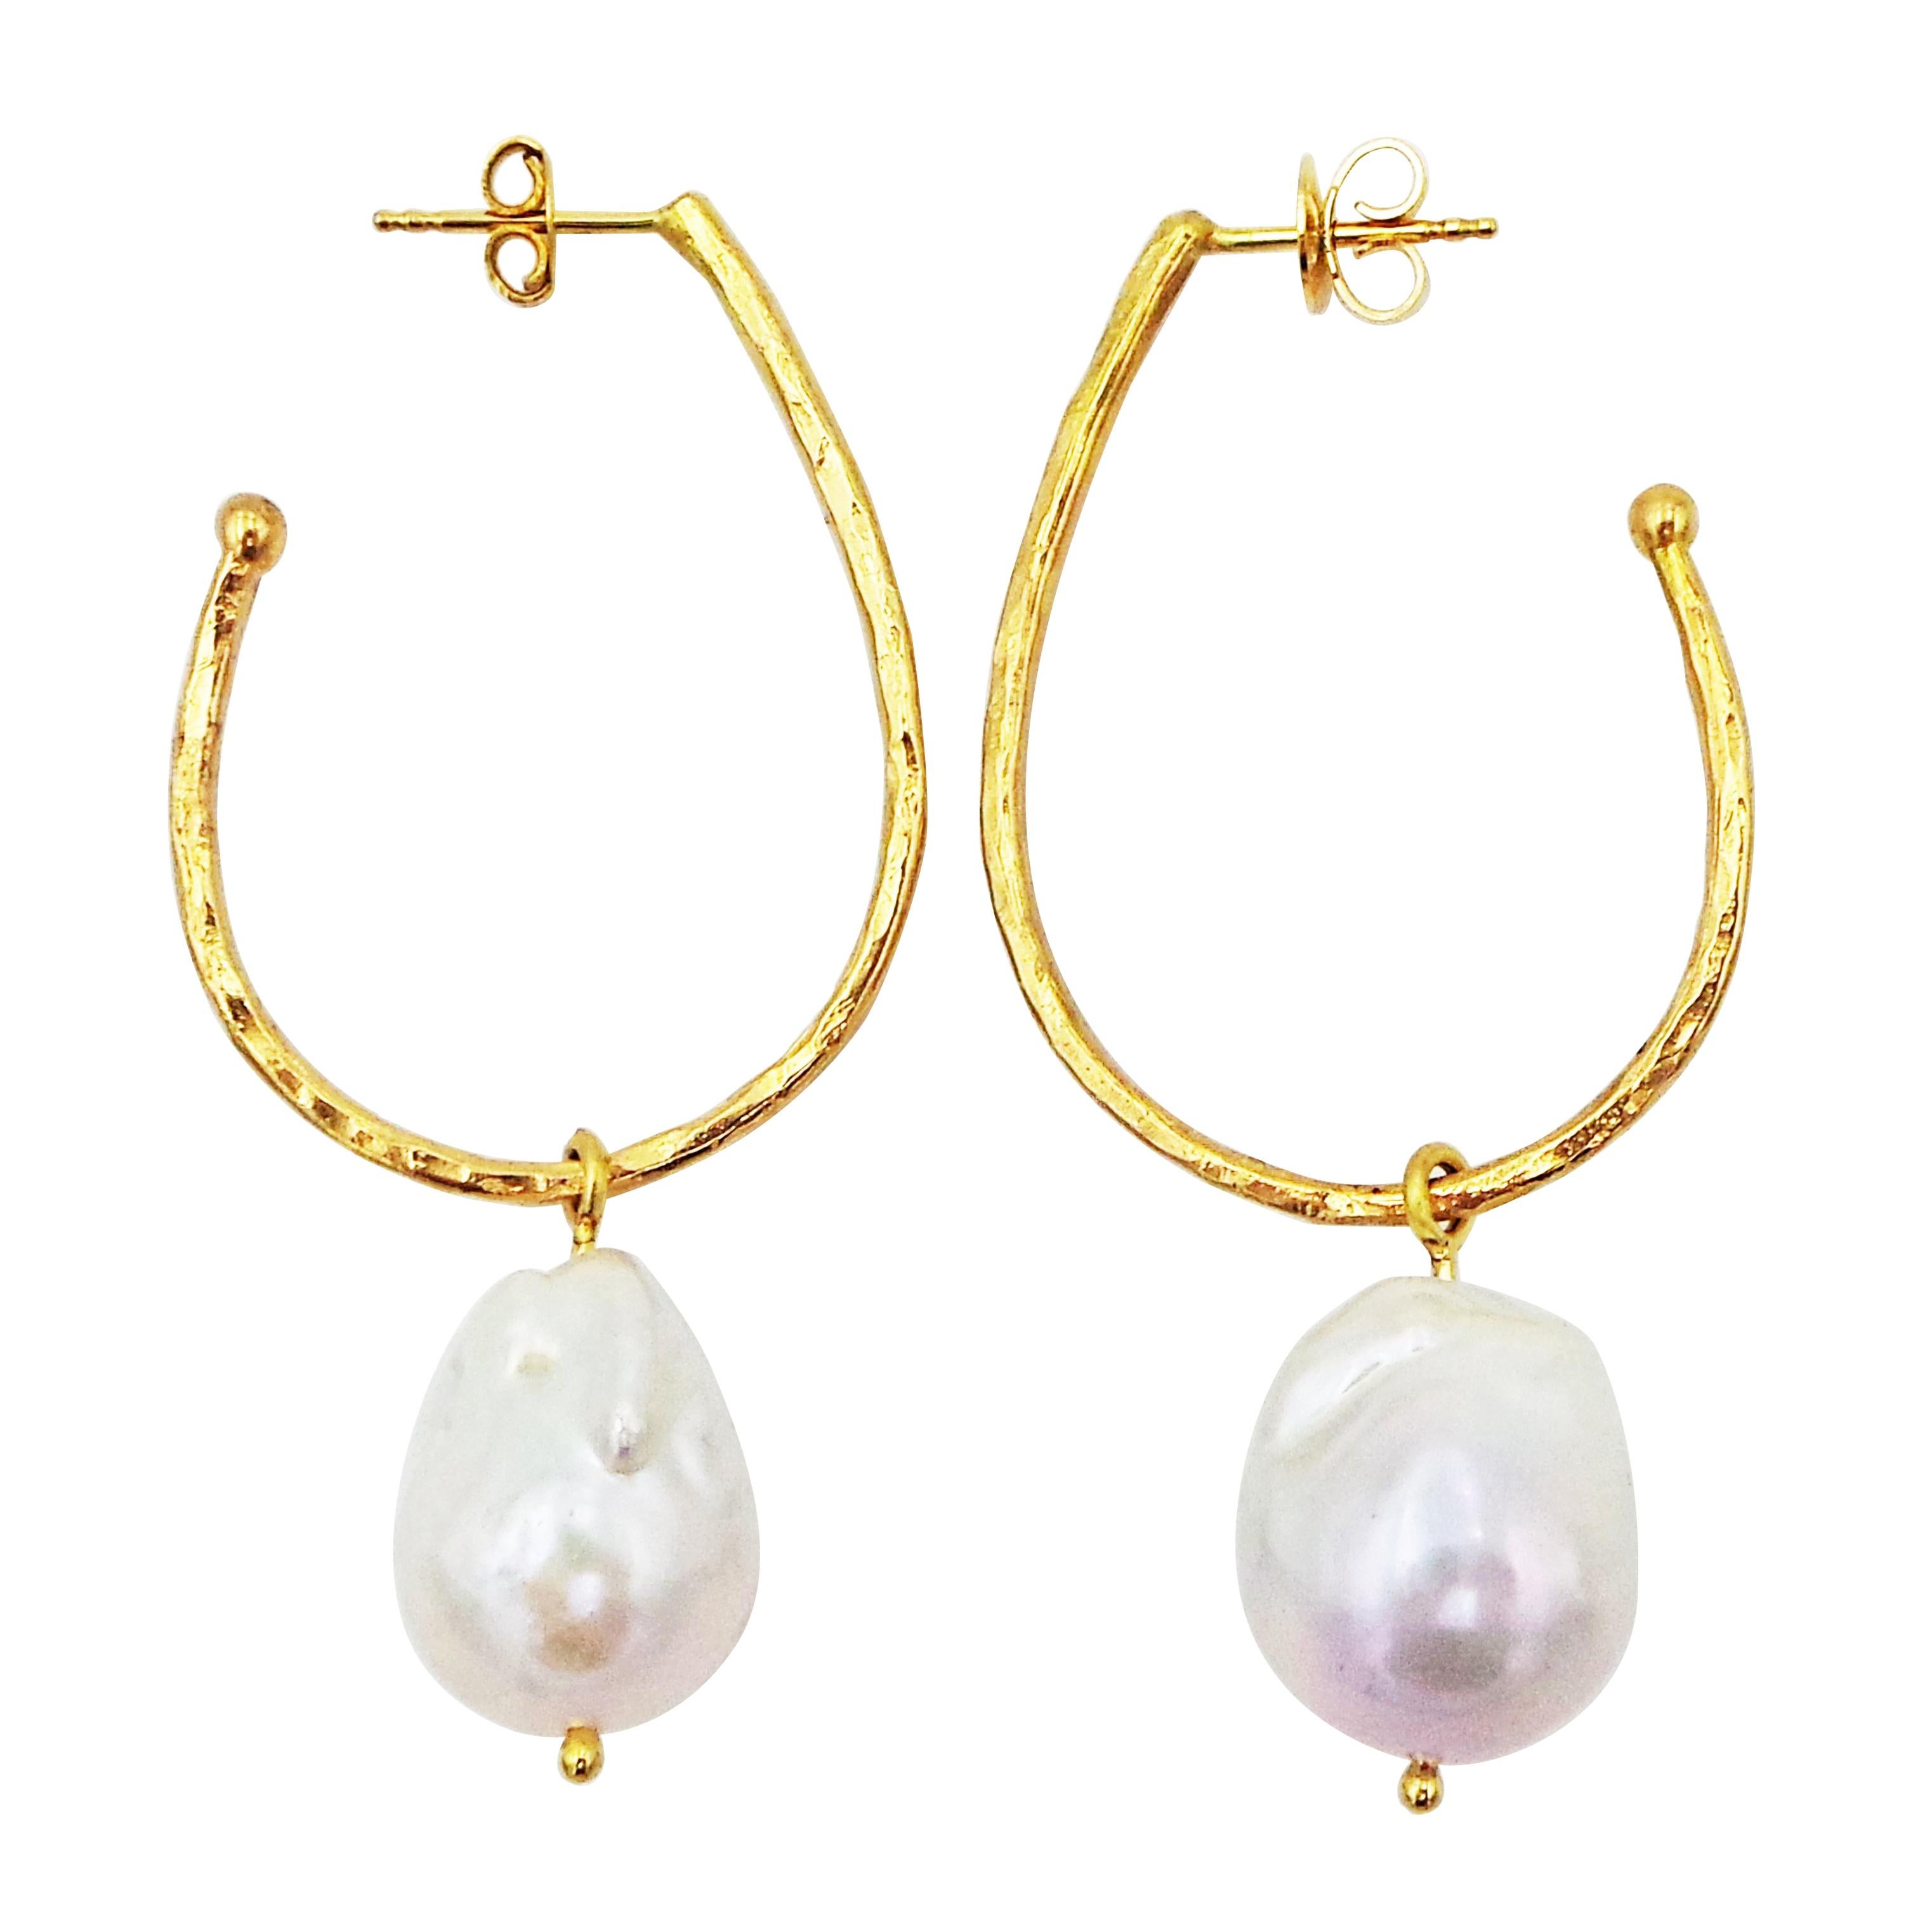 Hammered 18k Gold Elongated Hoop Stud Earrings with Baroque Pearl Charms For Sale